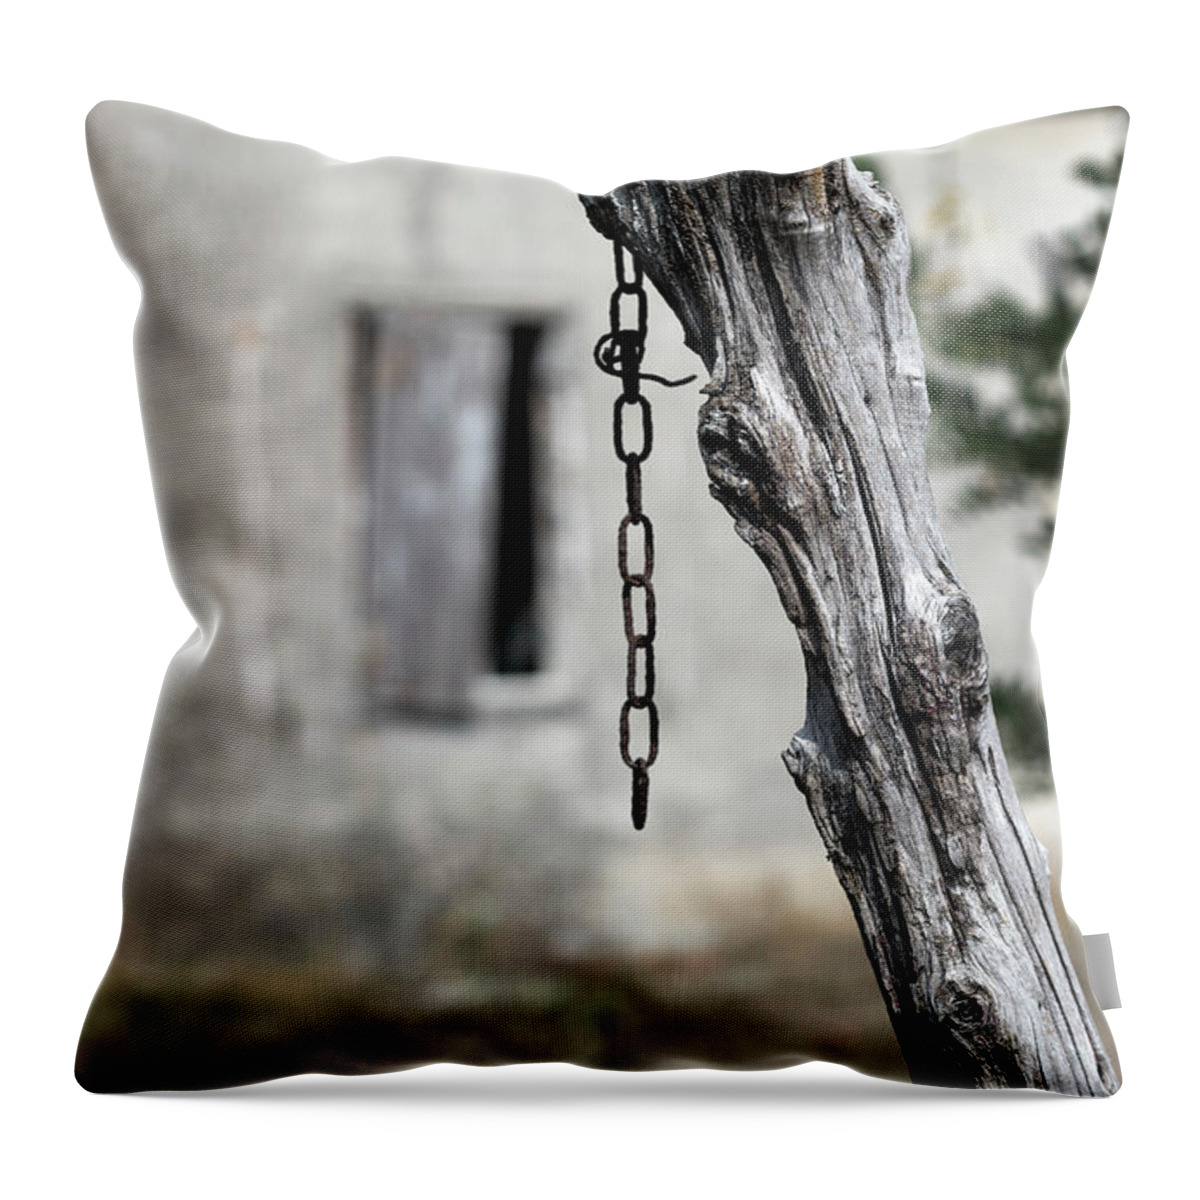 Rural Throw Pillow featuring the photograph Omen by Helga Novelli